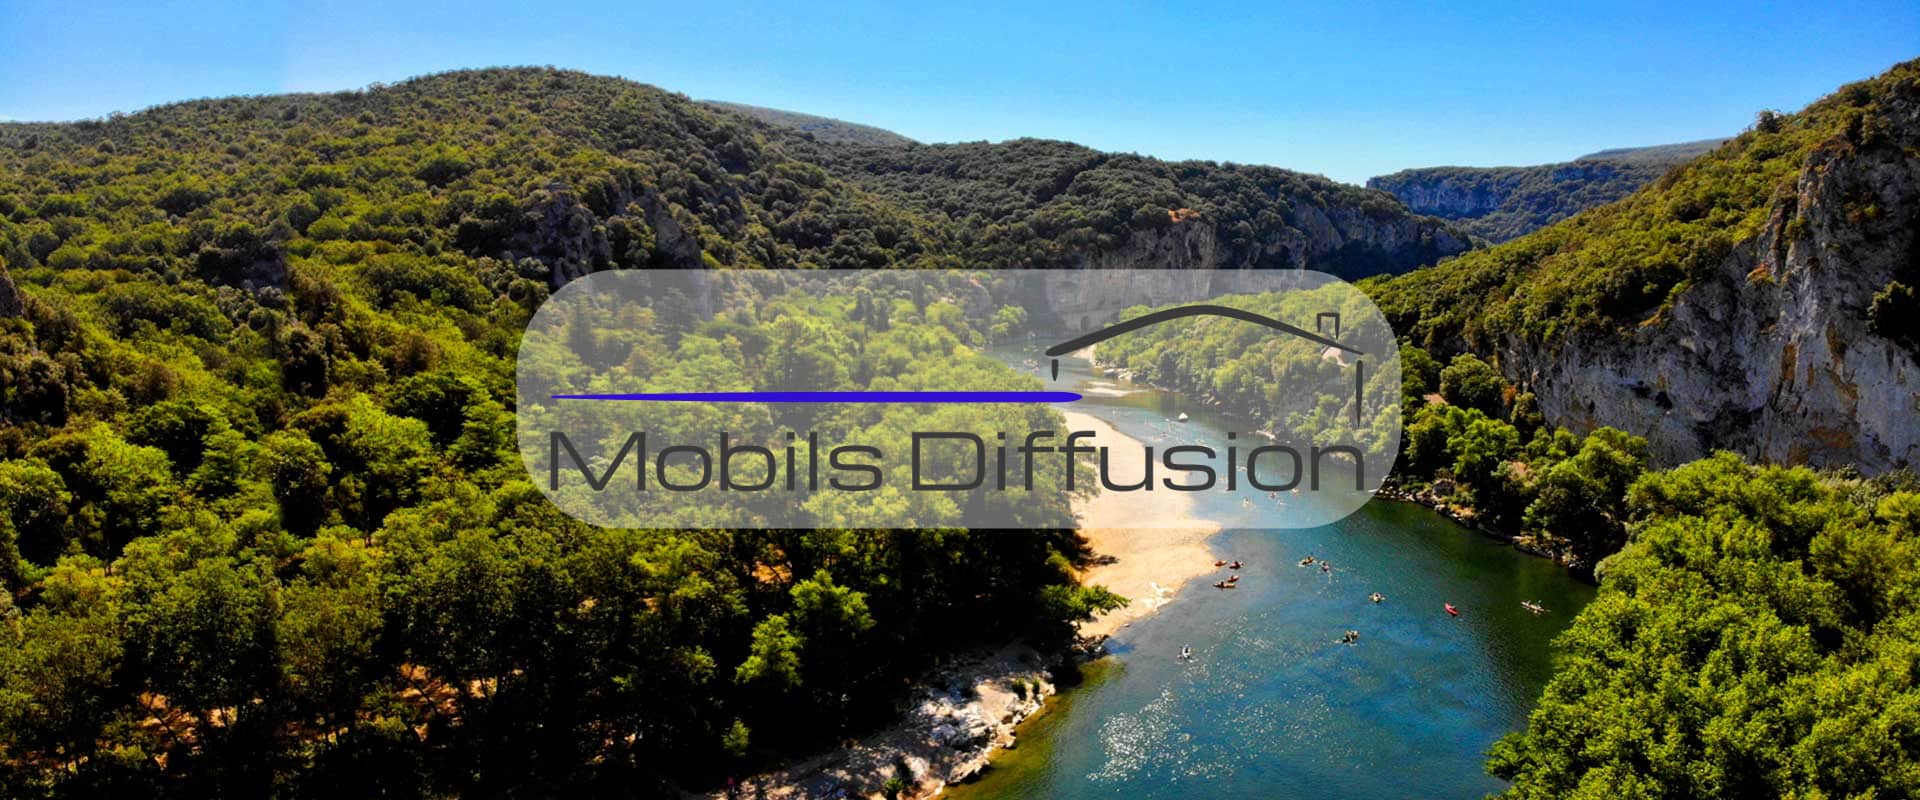 Mobils Diffusion - Camping plot in Ardeche for new or used mobile homes